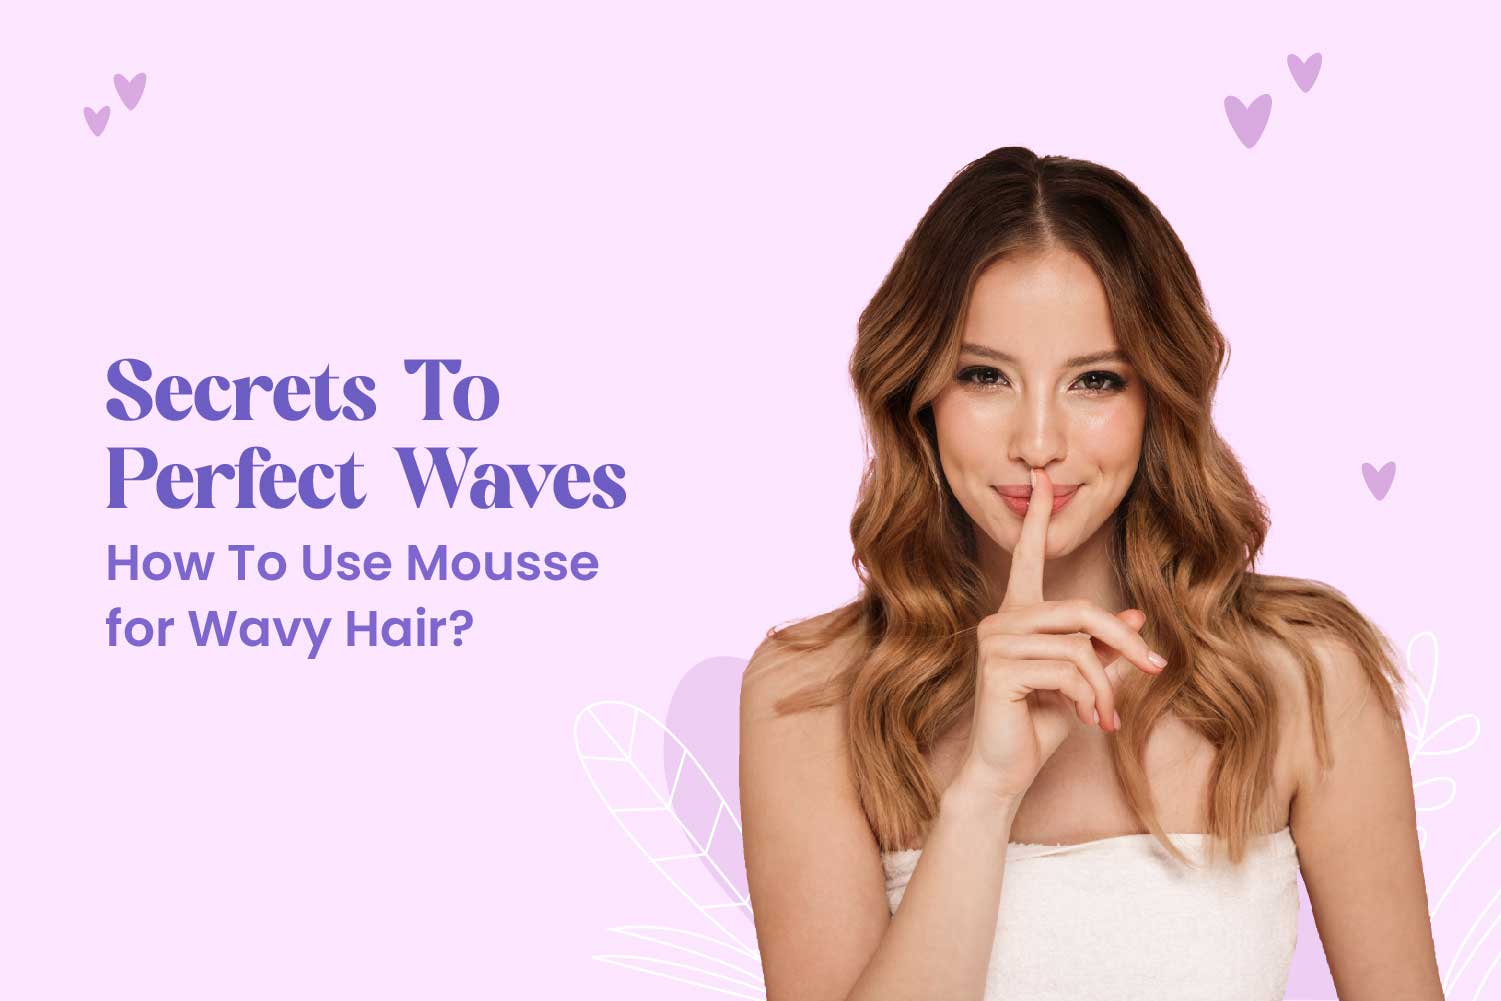 The Secret to Perfect Waves: How to Use Mousse for Wavy Hair?